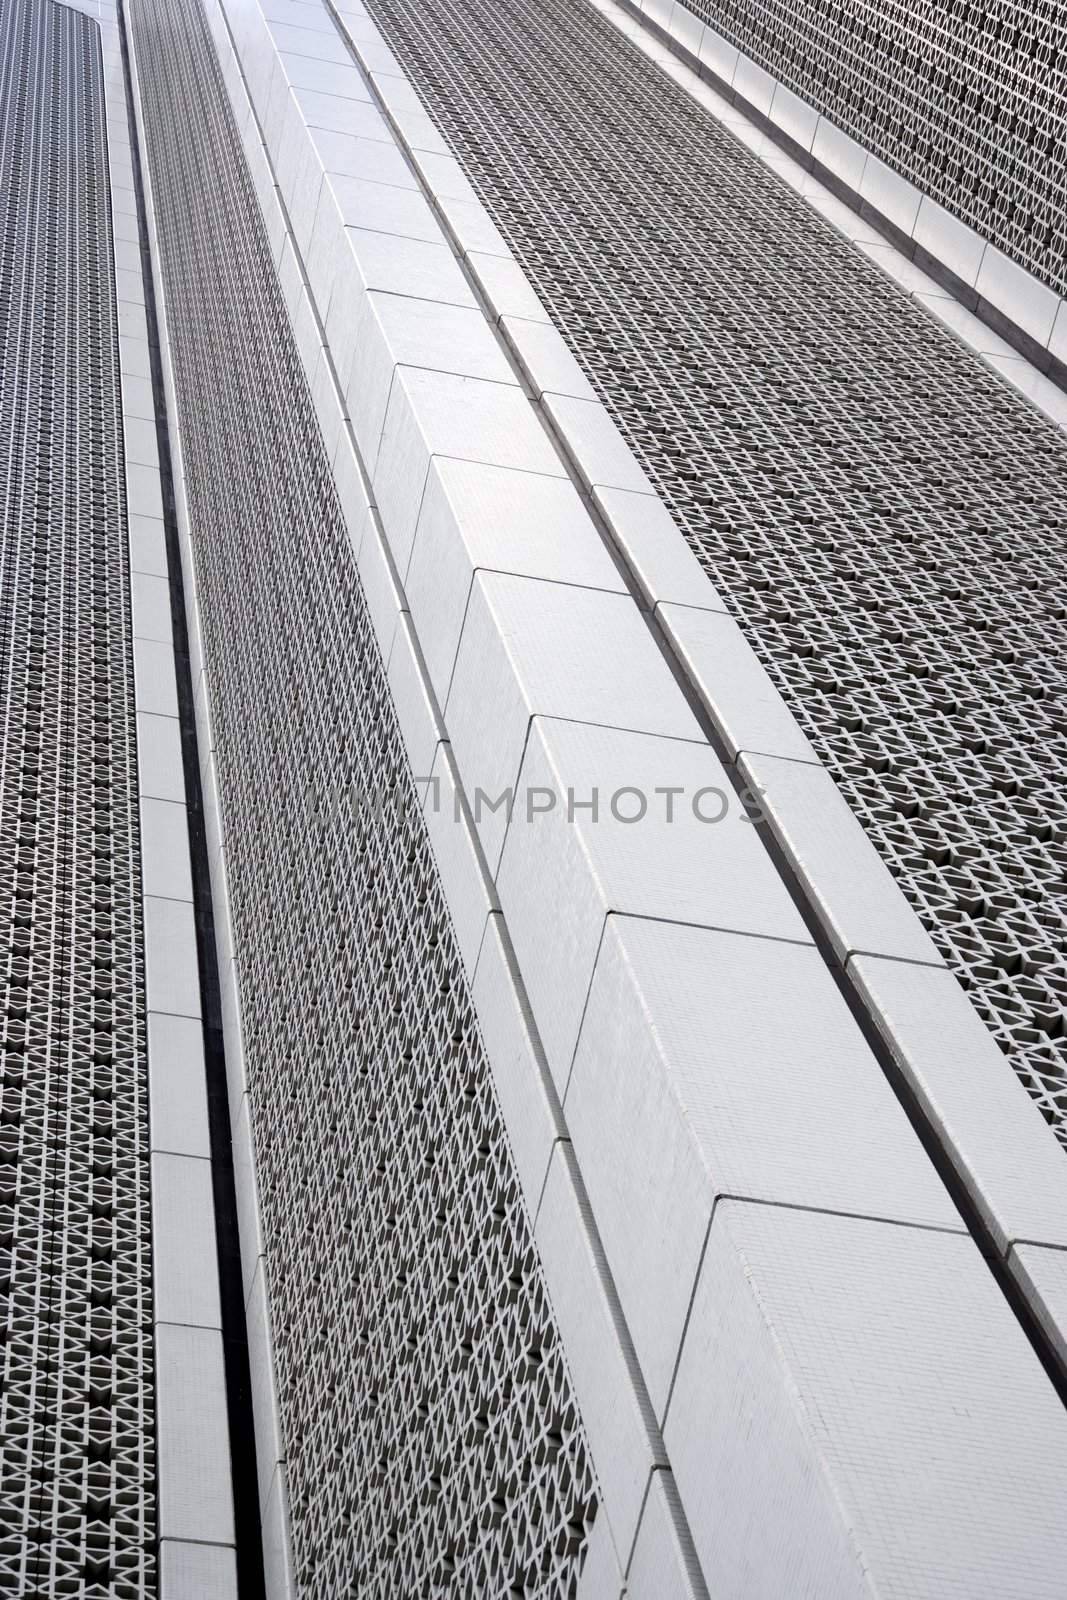 Details of a modern corporate building in Kuala Lumpur, Malaysia.